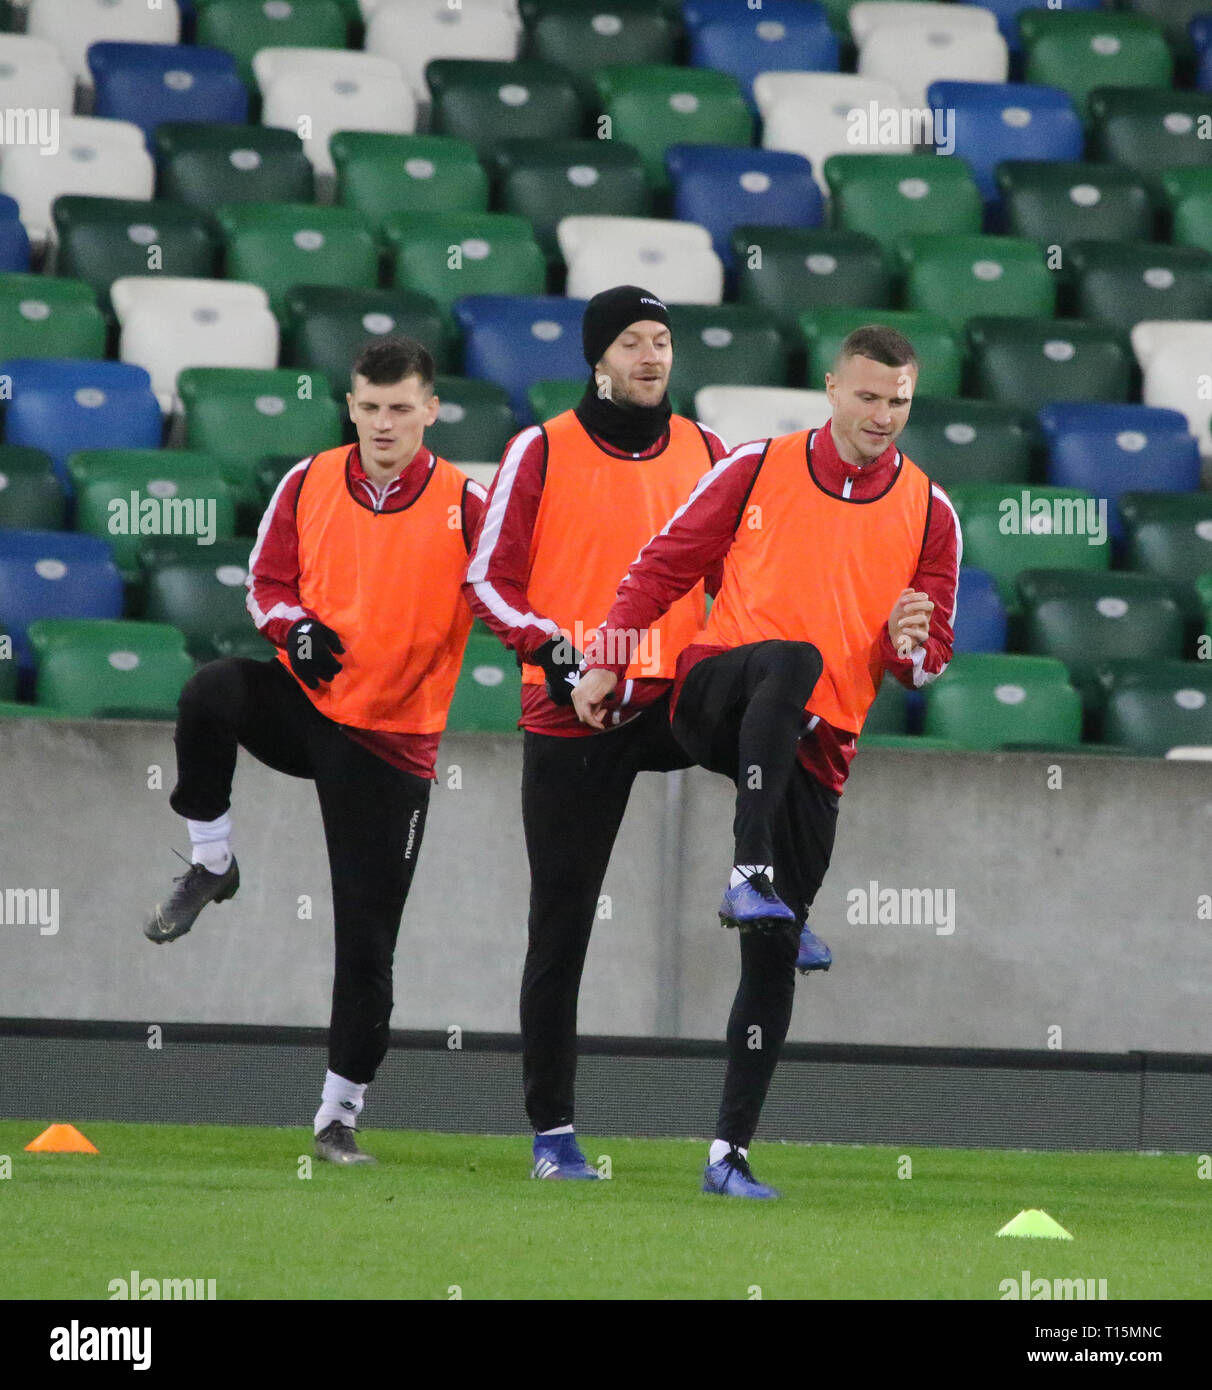 Windsor Park Belfast, Northern Ireland, UK. 23 March 2019. The Belarus squad train at Windsor Park before their game against Northern ireland tomorrow night. Credit: David Hunter/Alamy Live News. Stock Photo